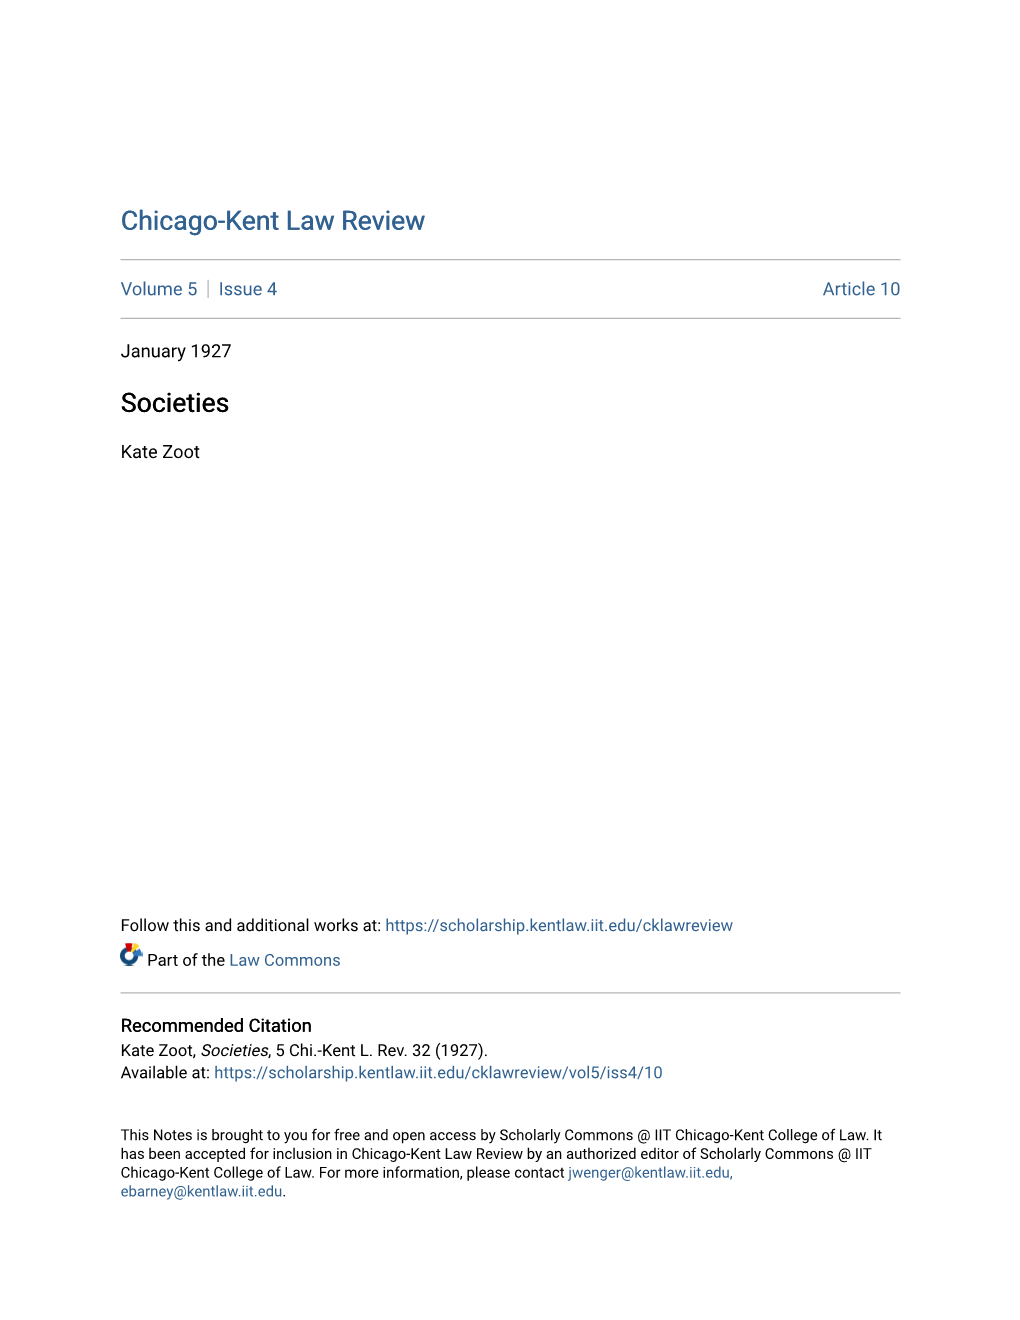 Chicago-Kent Law Review Societies